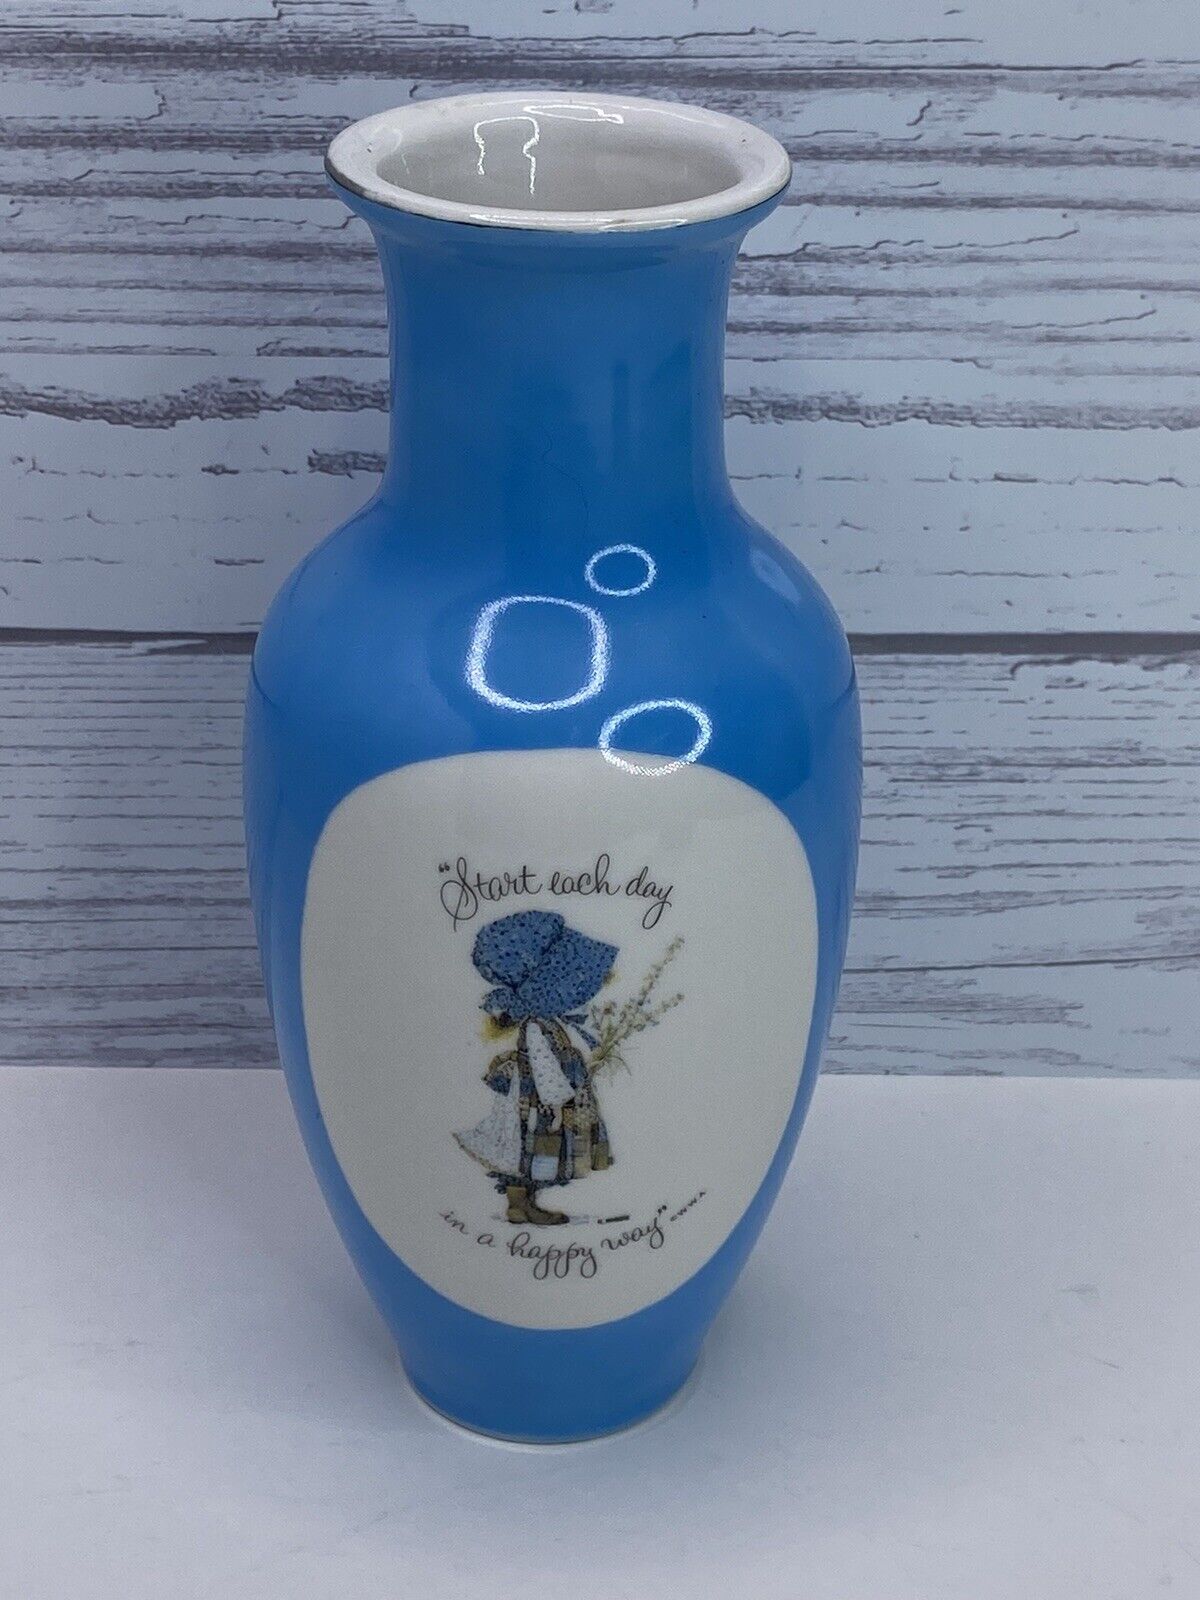 Vintage Blue Holly Hobbie Vase “Start Each Day In A Happy Way” 8 Inch